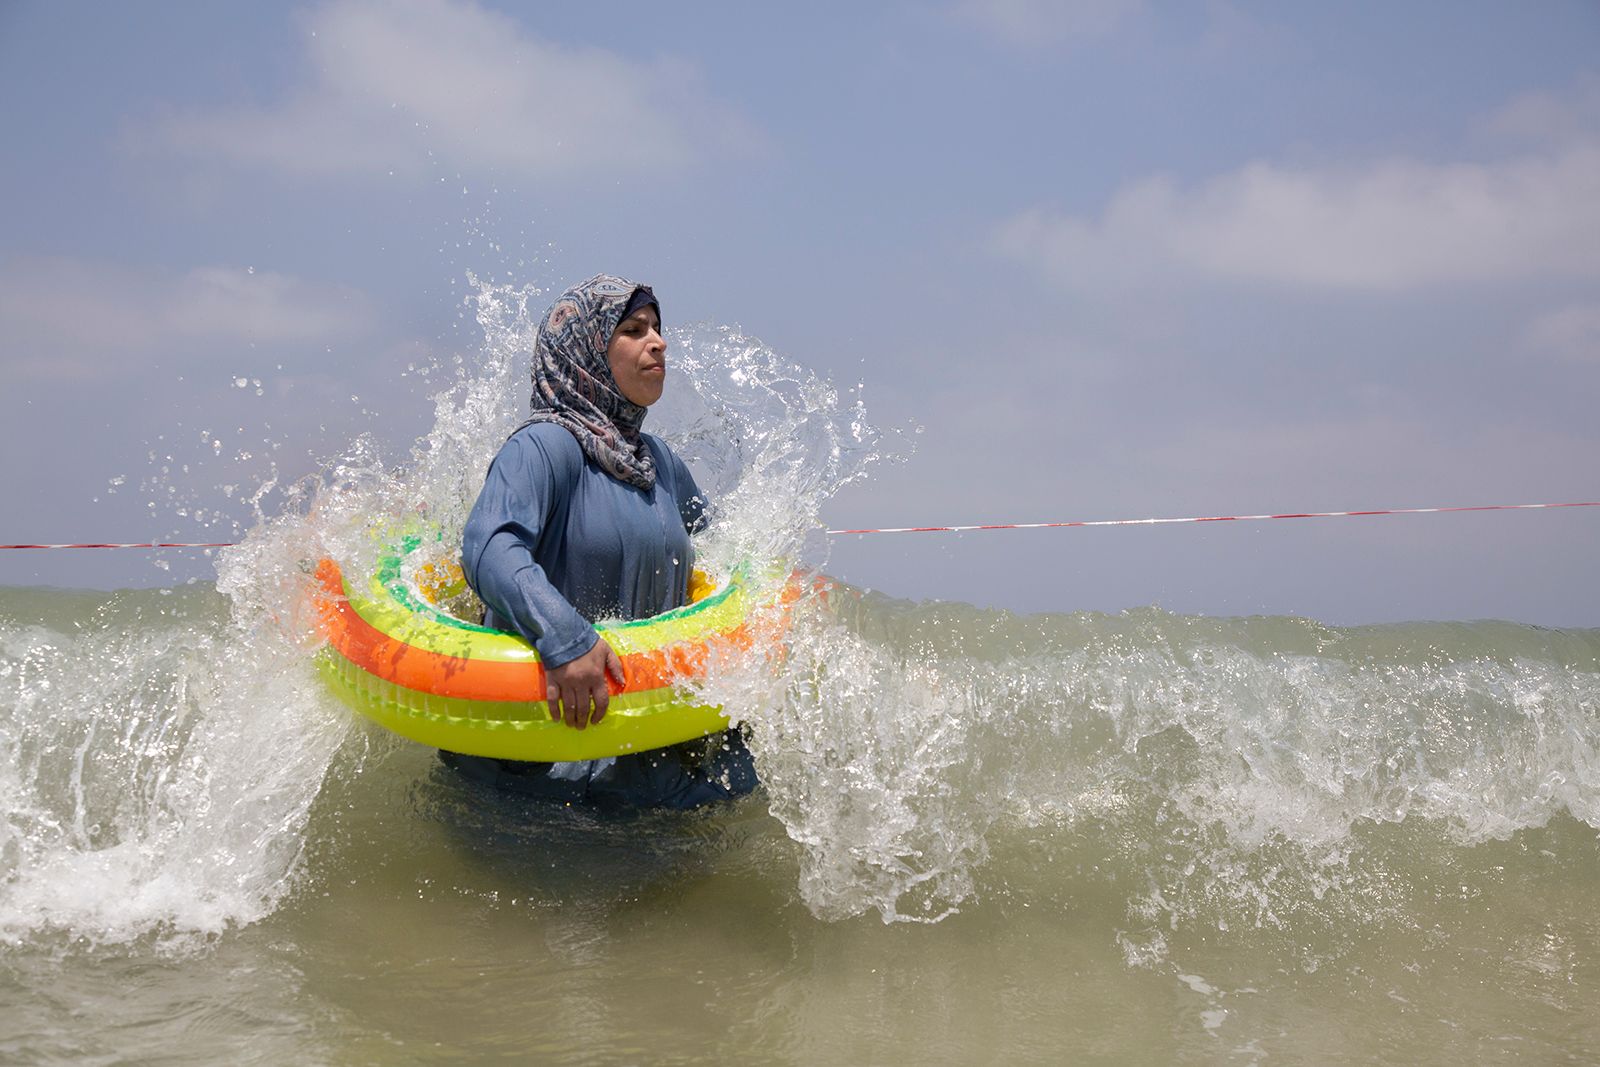 © Efrat Sela - Image from the A day at the beach photography project